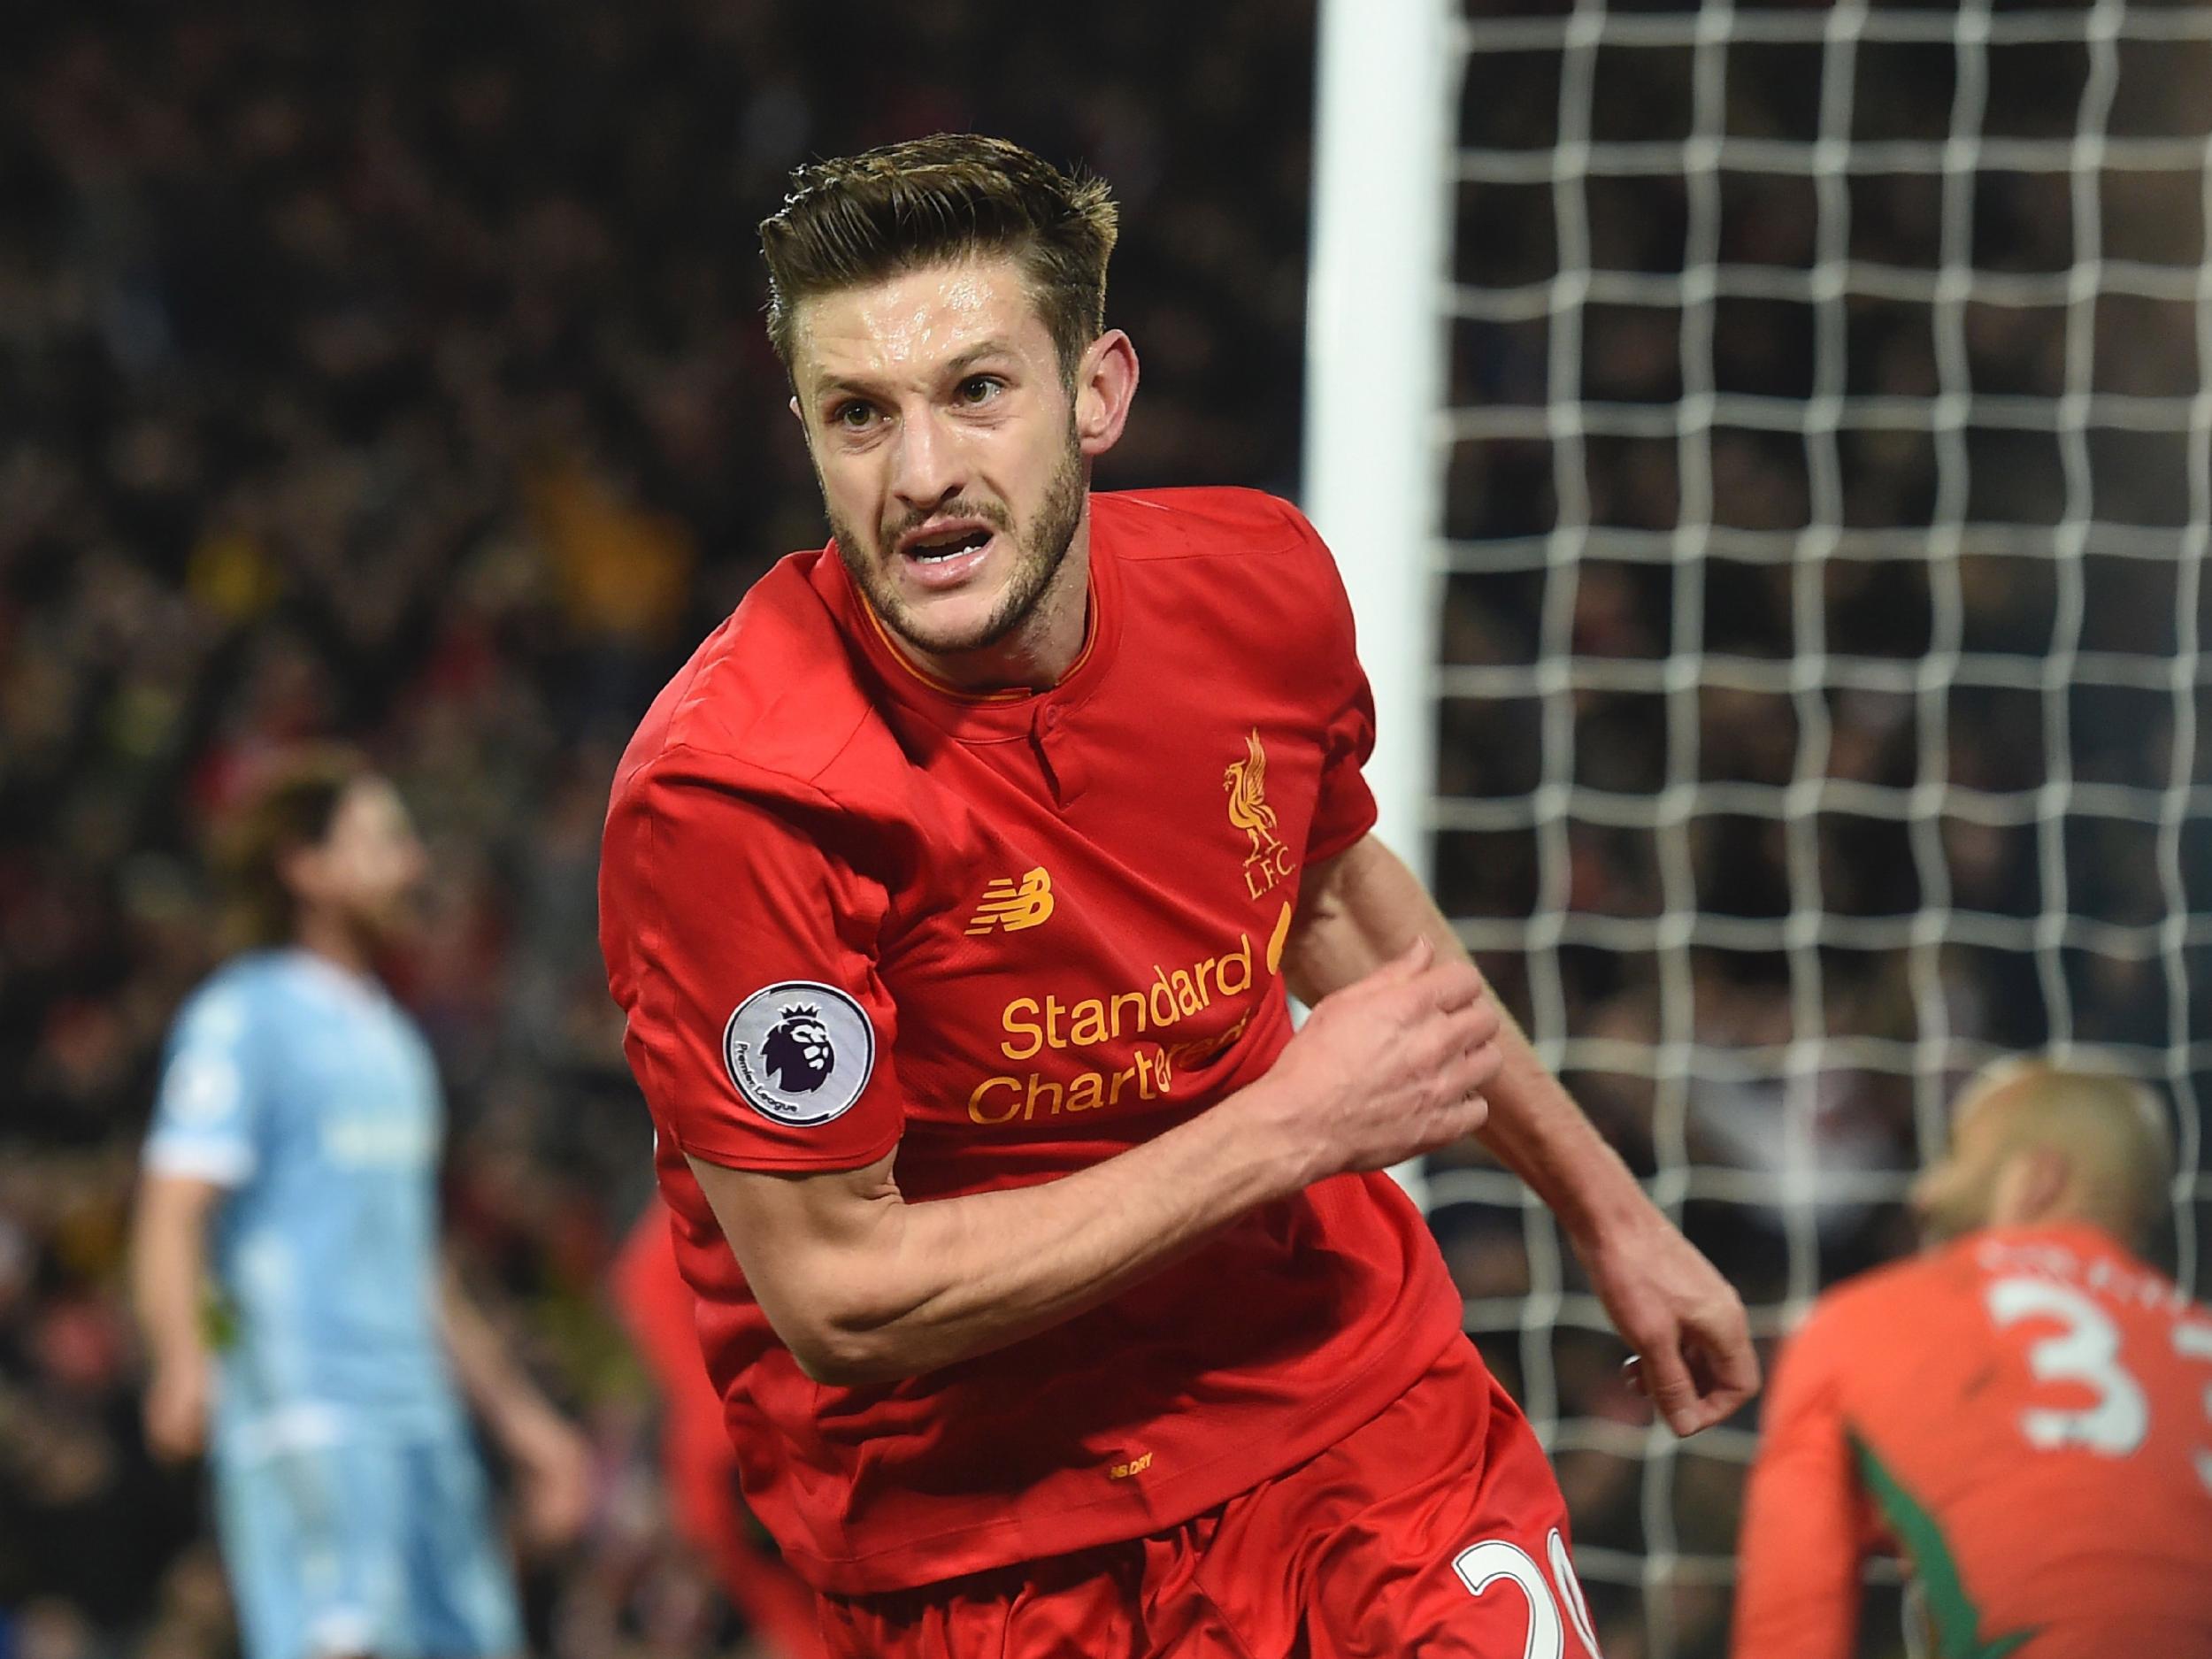 Lallana has been in emphatic form for the Reds this season